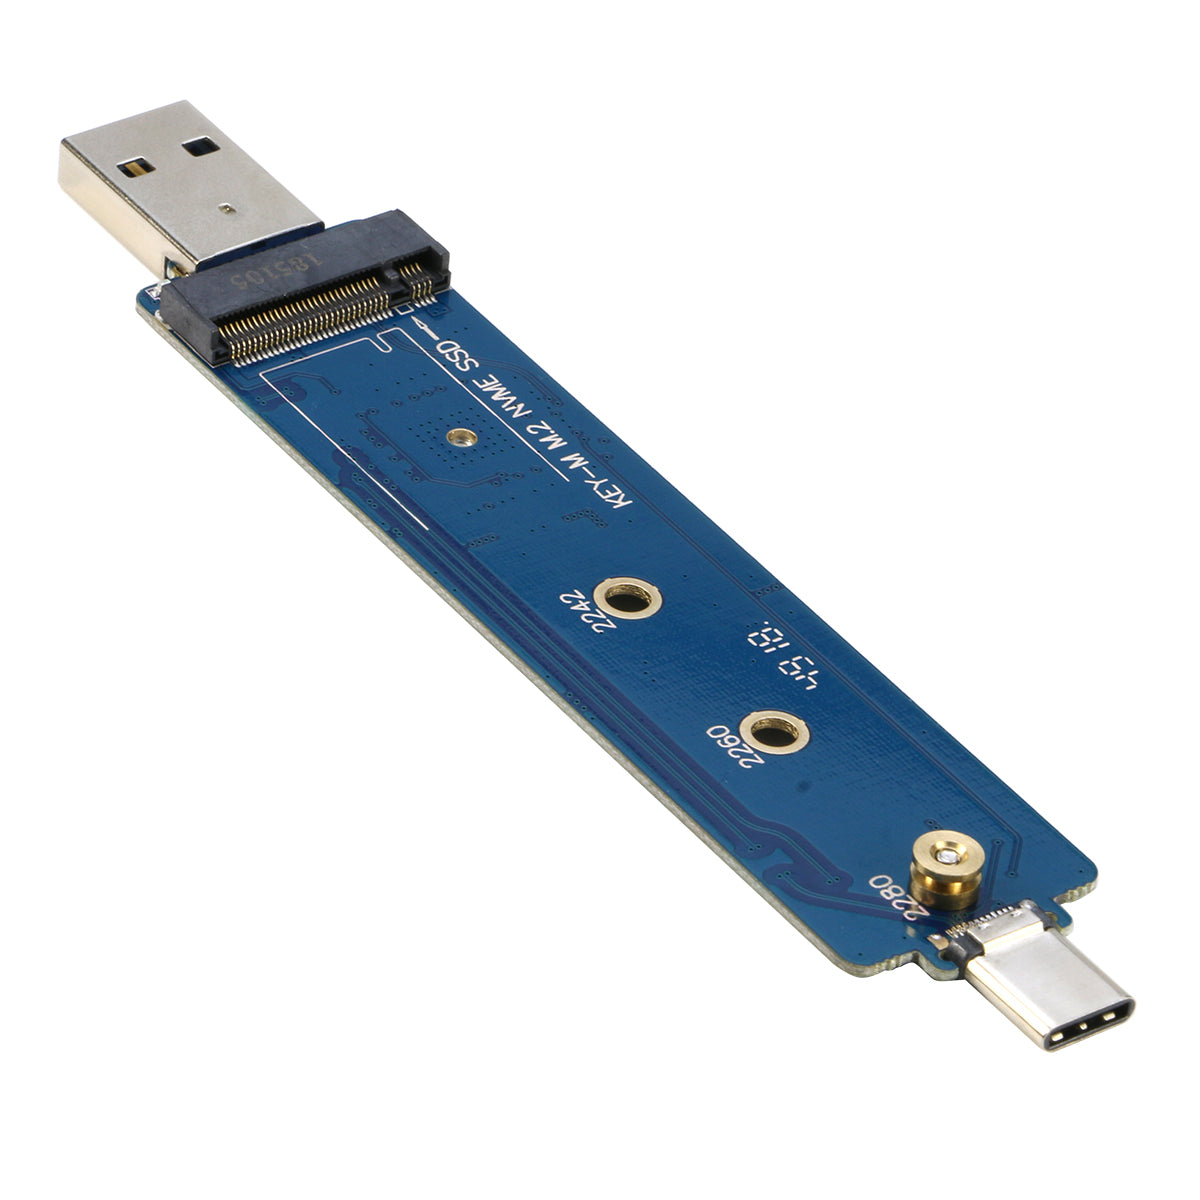 Riitop Nvme Usb Adapter Pcie M2 Nvme Ssd To Usb 31 Gen2 Type A And T 2118